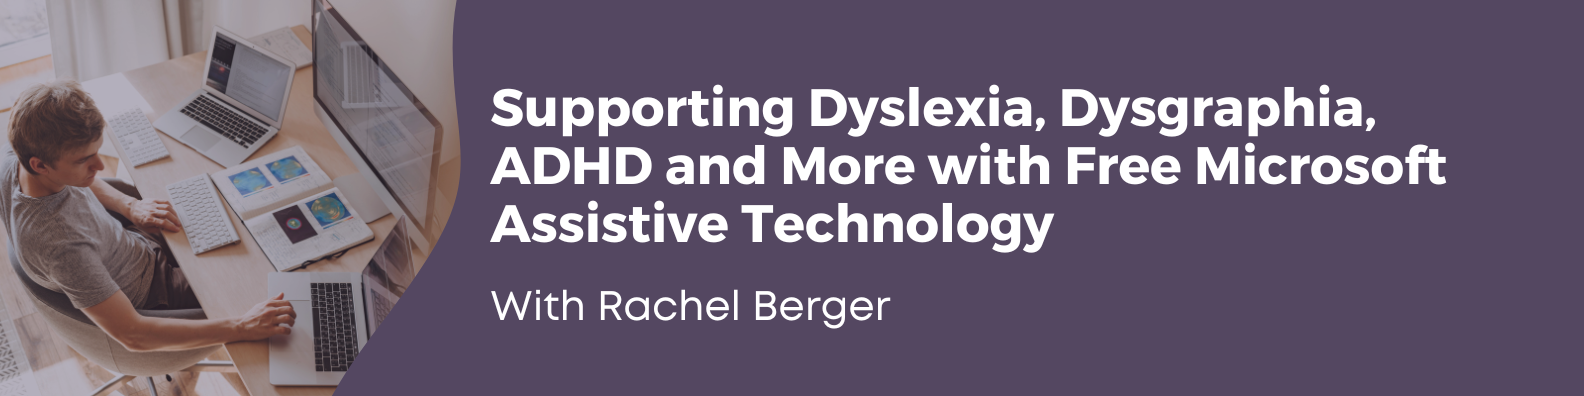 Supporting Dyslexia, Dysgraphia, ADHD, and More with Free Microsoft Assistive Technology